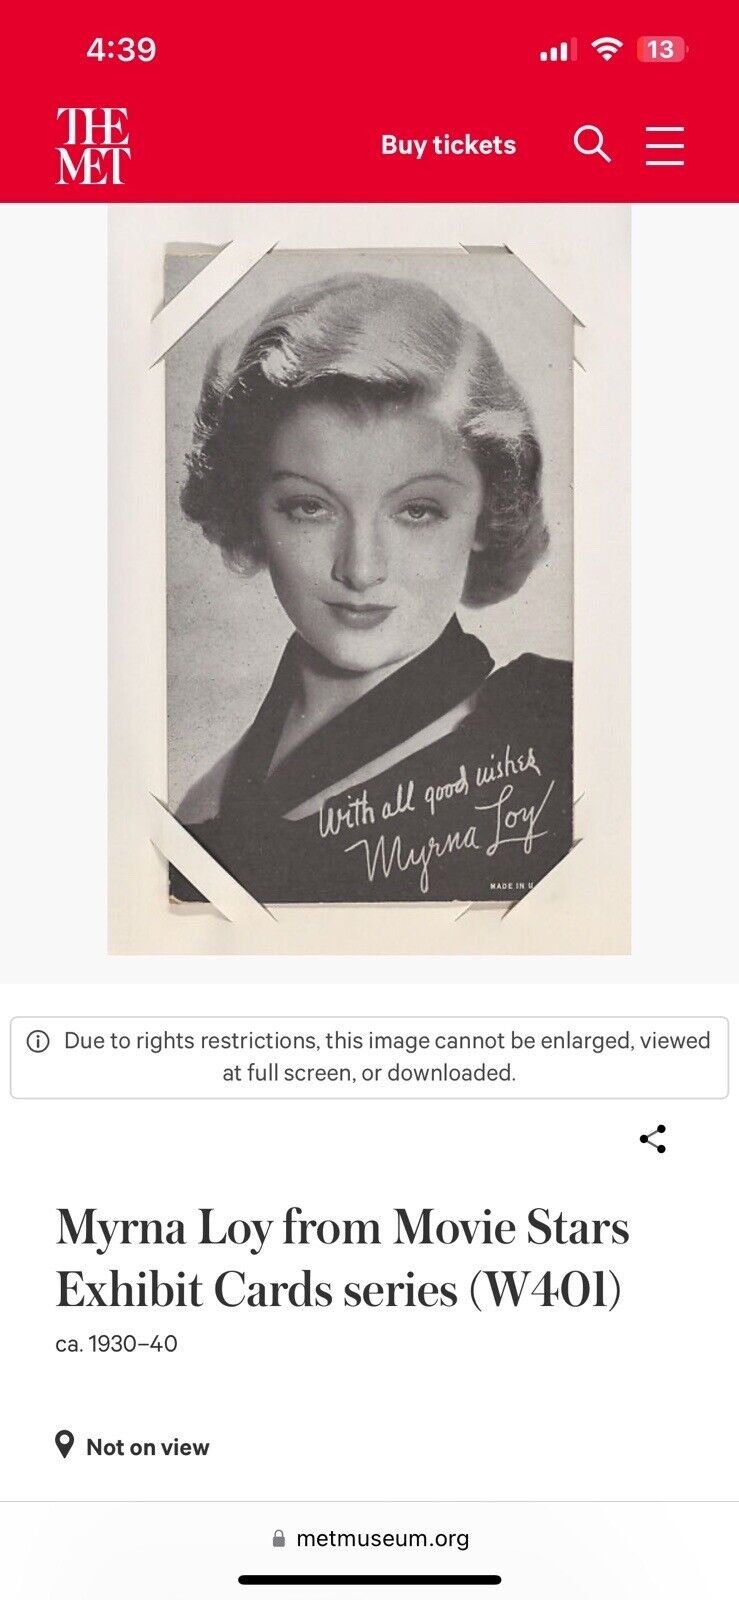 MUSEUM PIECE Myrna Loy from Movie Stars Exhibit Cards series (W401) THE MET